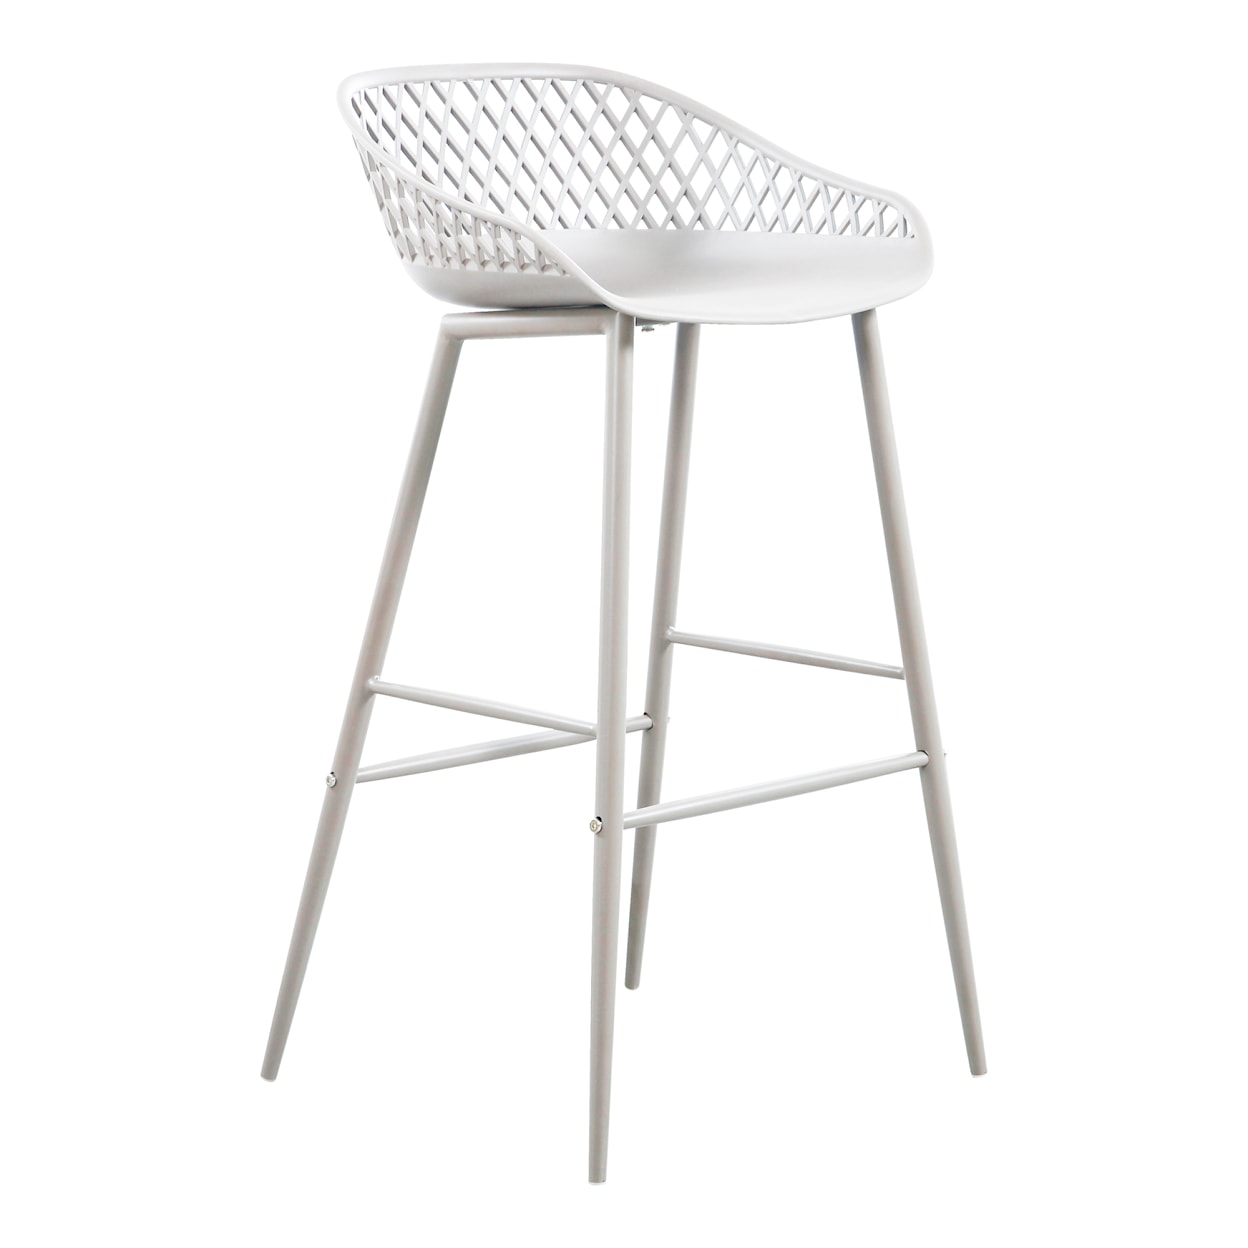 Moe's Home Collection Piazza Piazza Outdoor Barstool White-M2